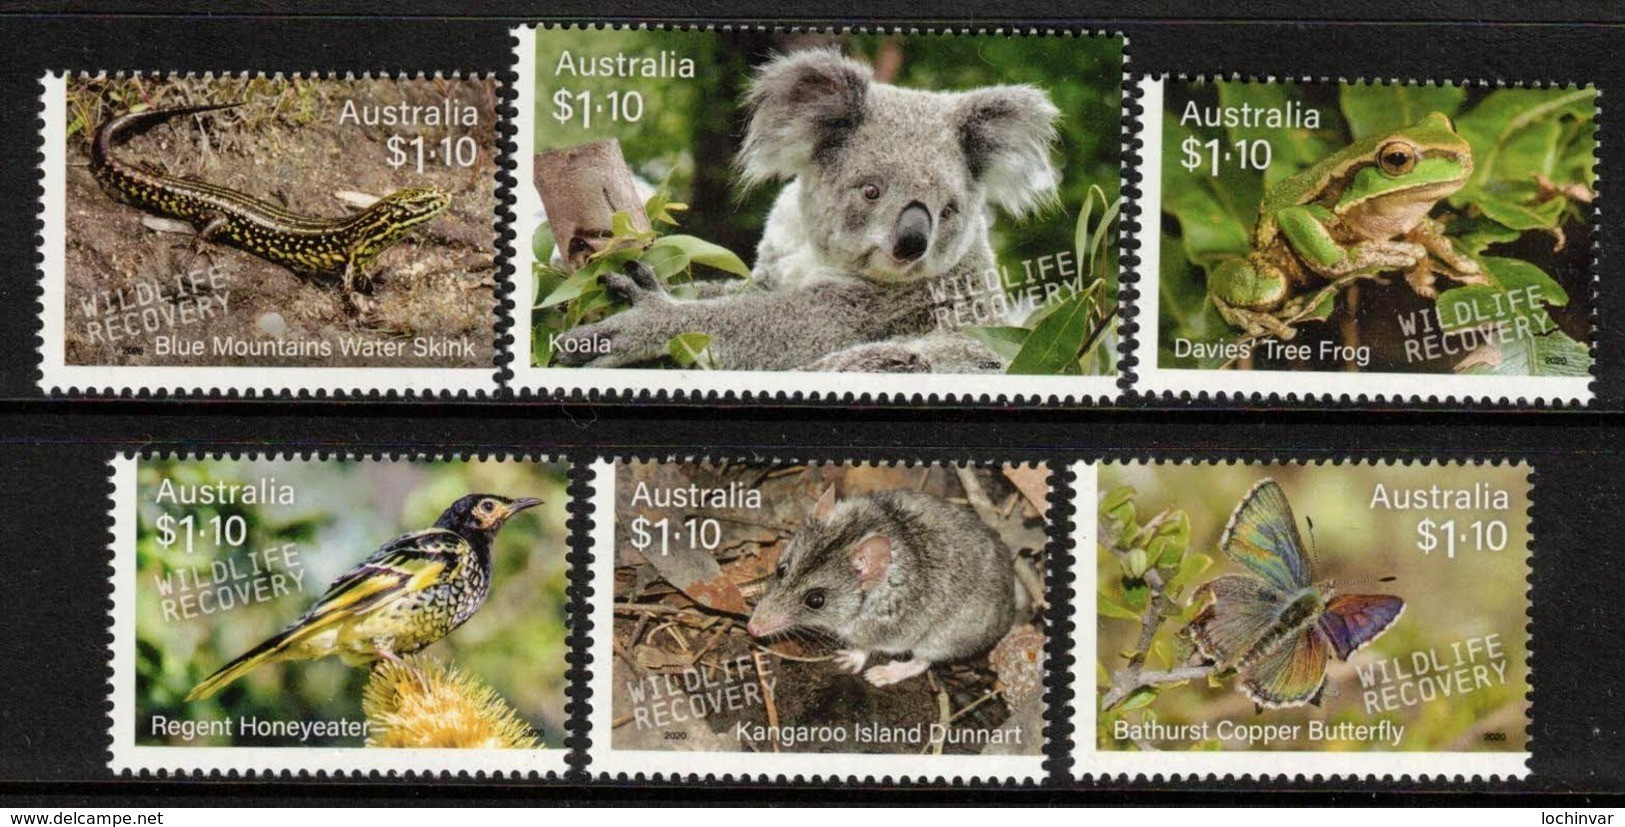 AUSTRALIA, 2020 WILDLIFE RECOVERY 6 MNH - Mint Stamps